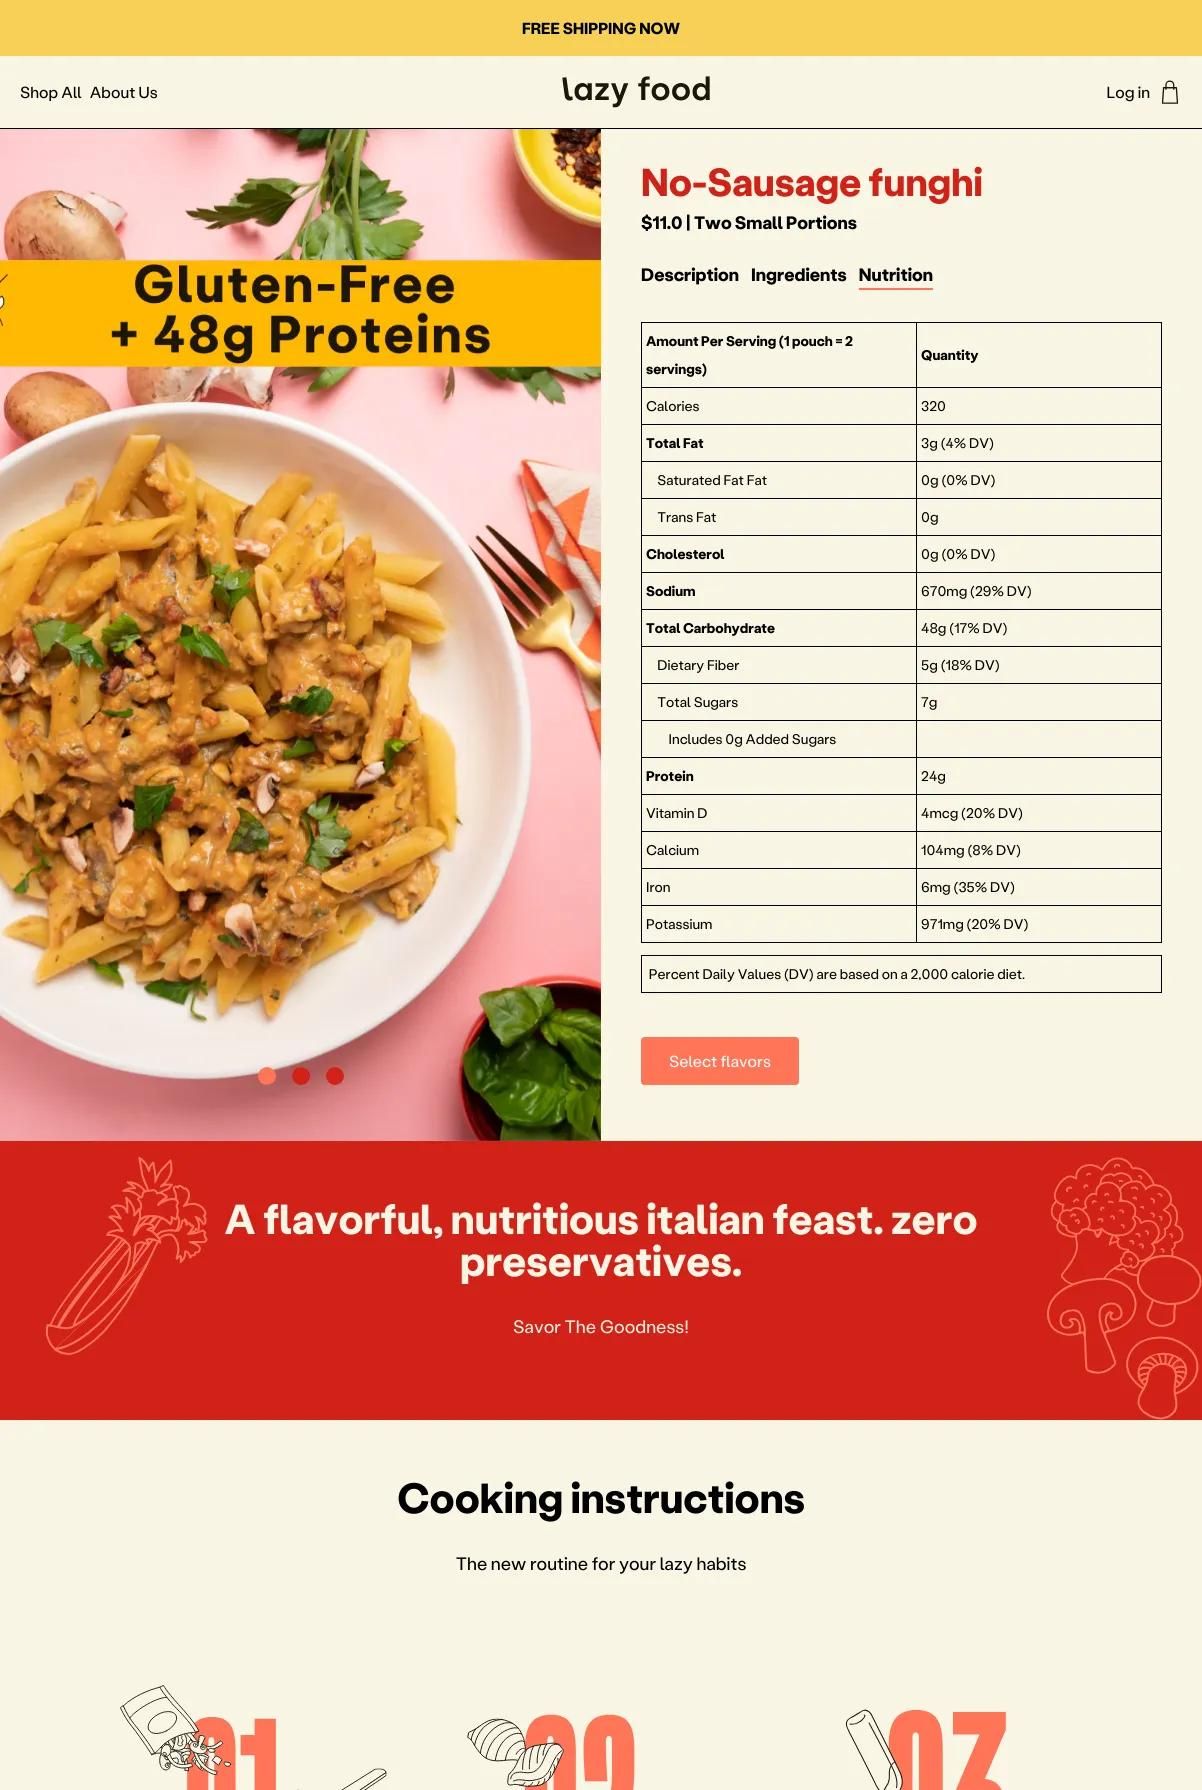 Screenshot 3 of Lazy Food Co. (Example Shopify Food and Beverage Website)